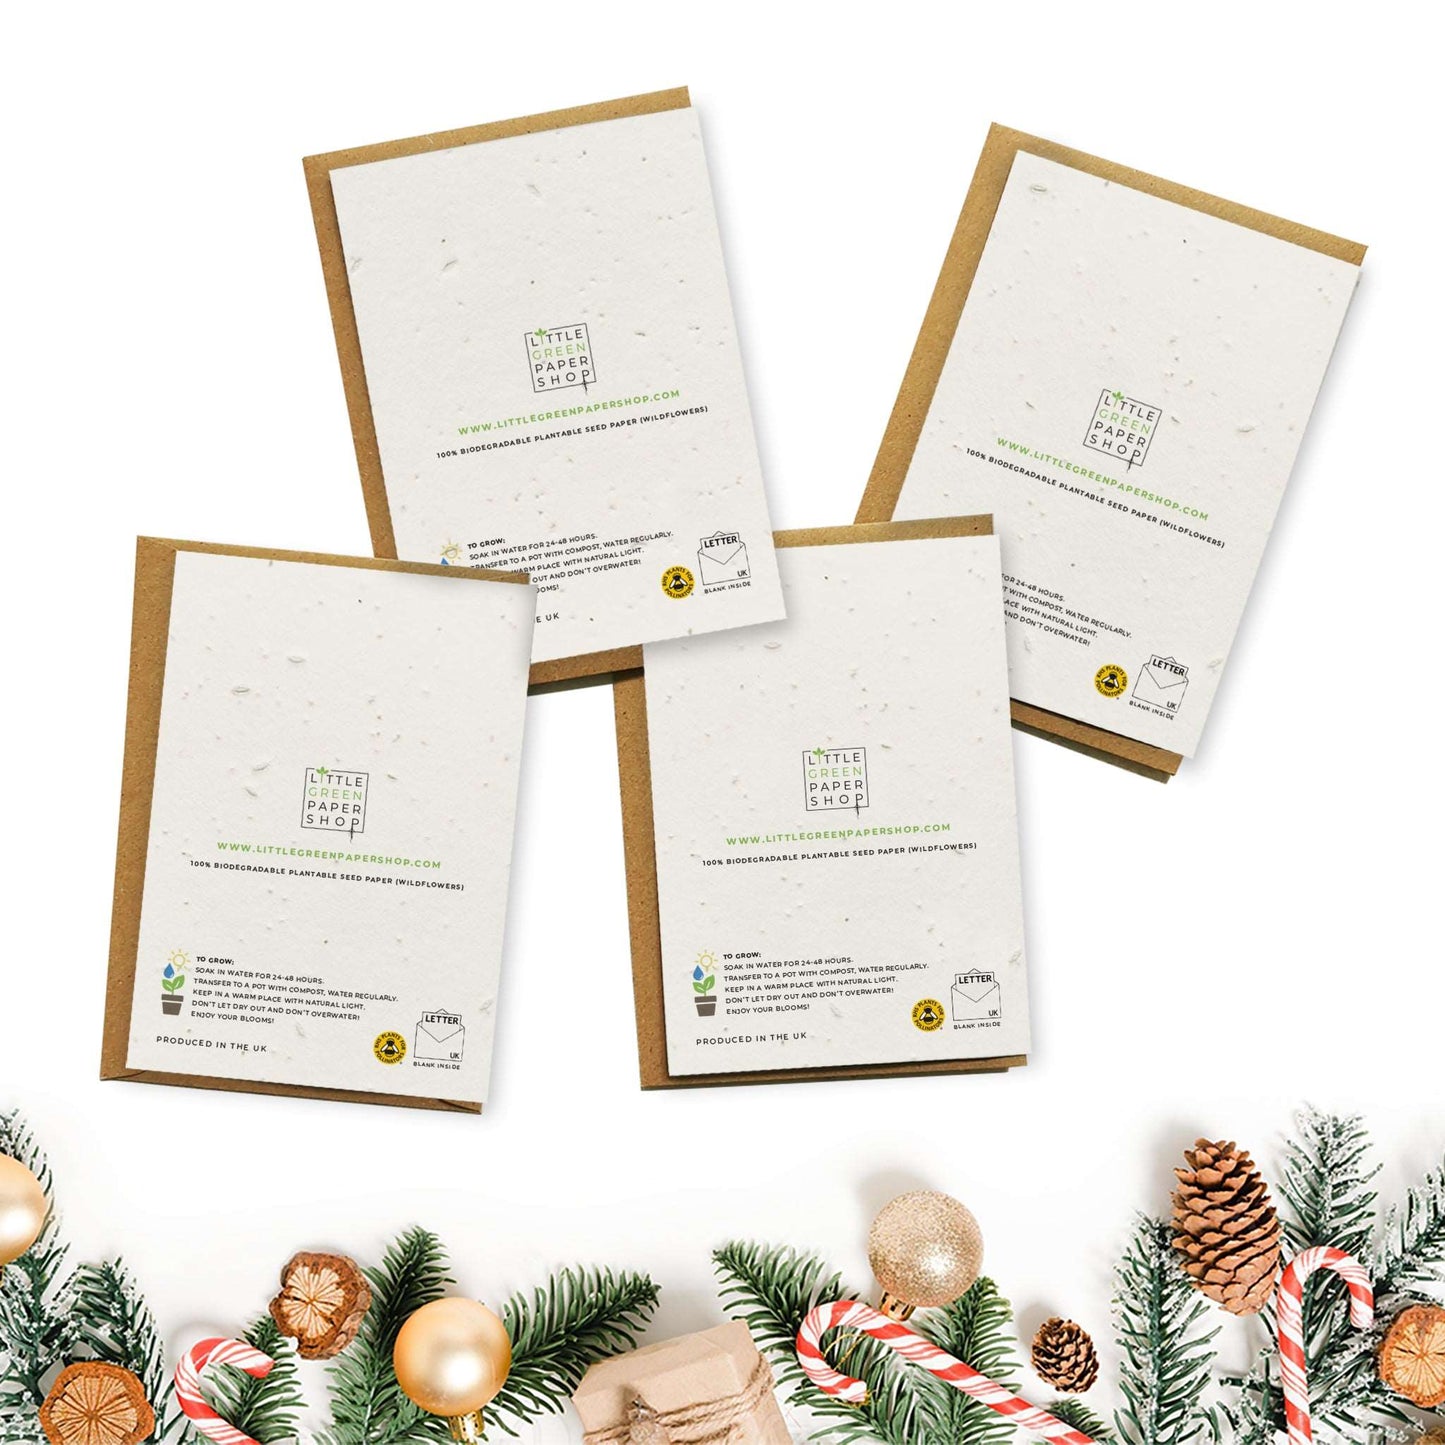 Plantable Seed Paper Christmas Cards 4-Pack - Candycanes Greeting Card Little Green Paper Shop